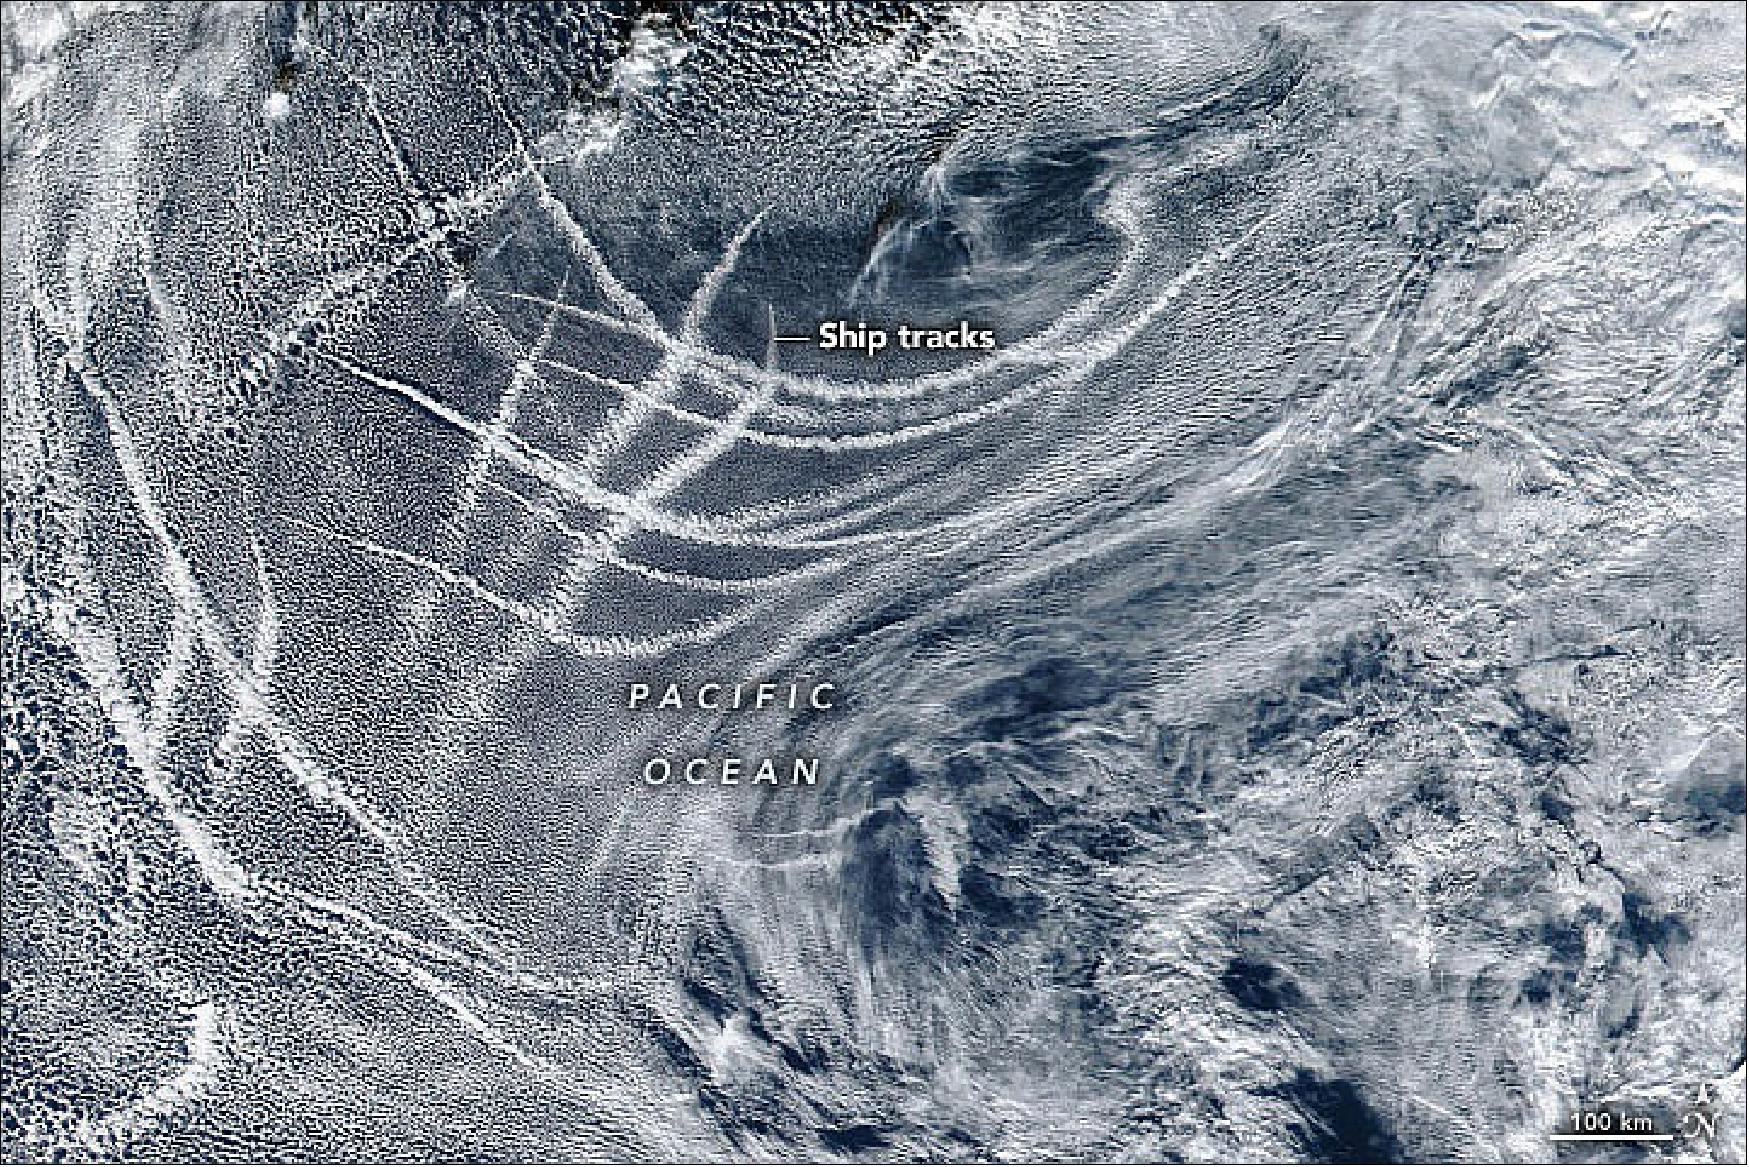 Figure 24: The Visible Infrared Imaging Radiometer Suite (VIIRS) on the Suomi-NPP satellite acquired this image of ship tracks on December 7, 2021. On that day, the tracks revealed several shipping lanes intersecting in the waters off the Pacific coast of North America (image credit: NASA Earth Observatory image by Joshua Stevens, using VIIRS data from NASA EOSDIS LANCE, GIBS/Worldview, and the Suomi National Polar-orbiting Partnership. Story by Kathryn Hansen)